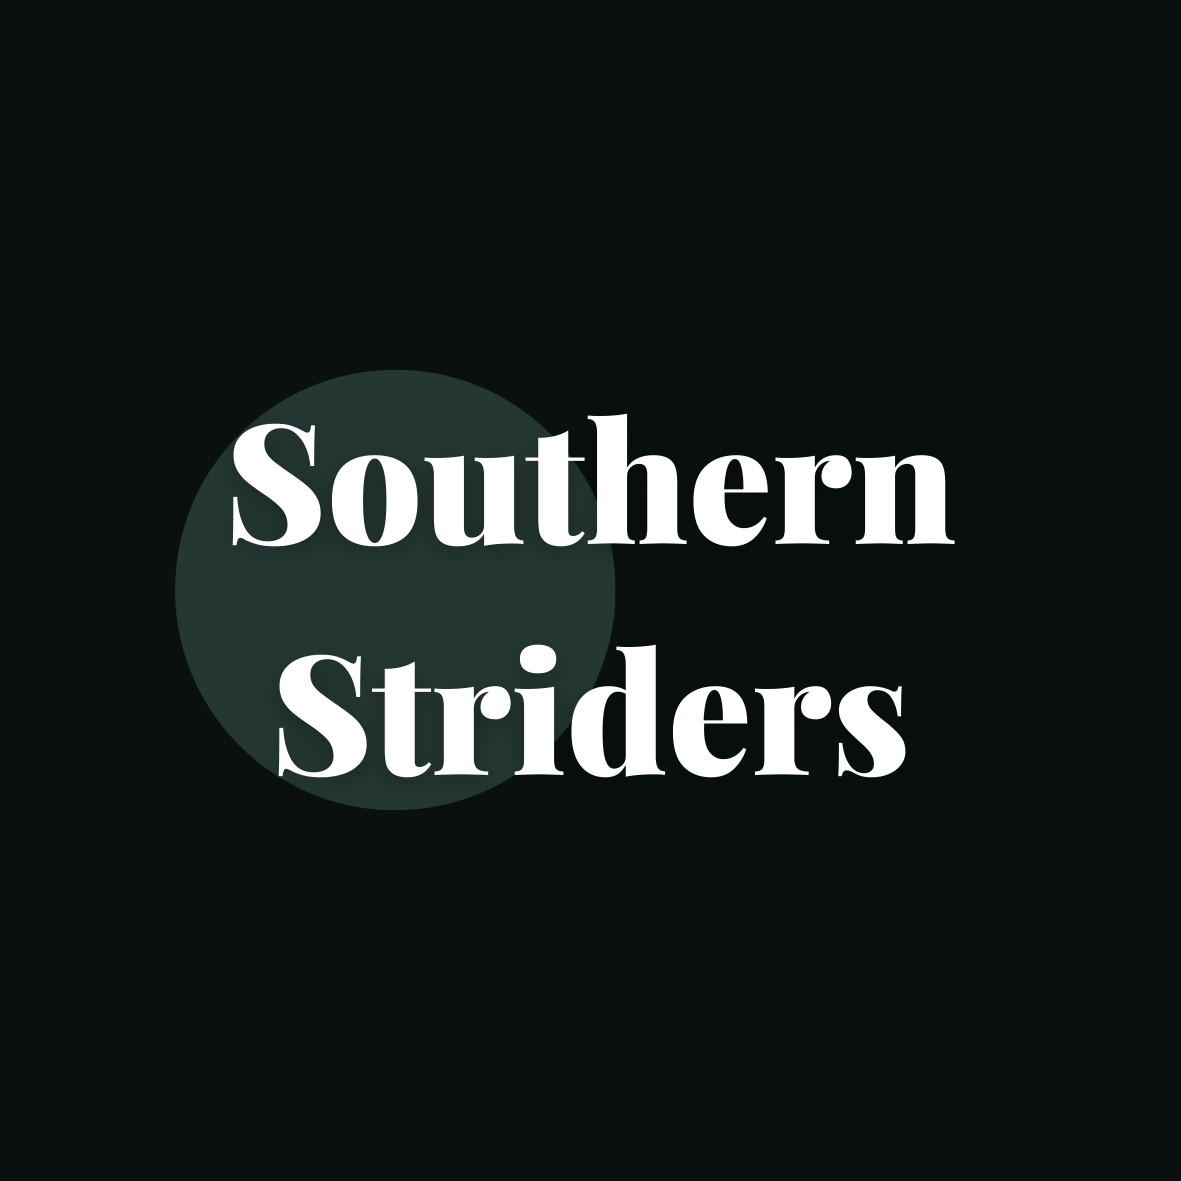 Southern Striders